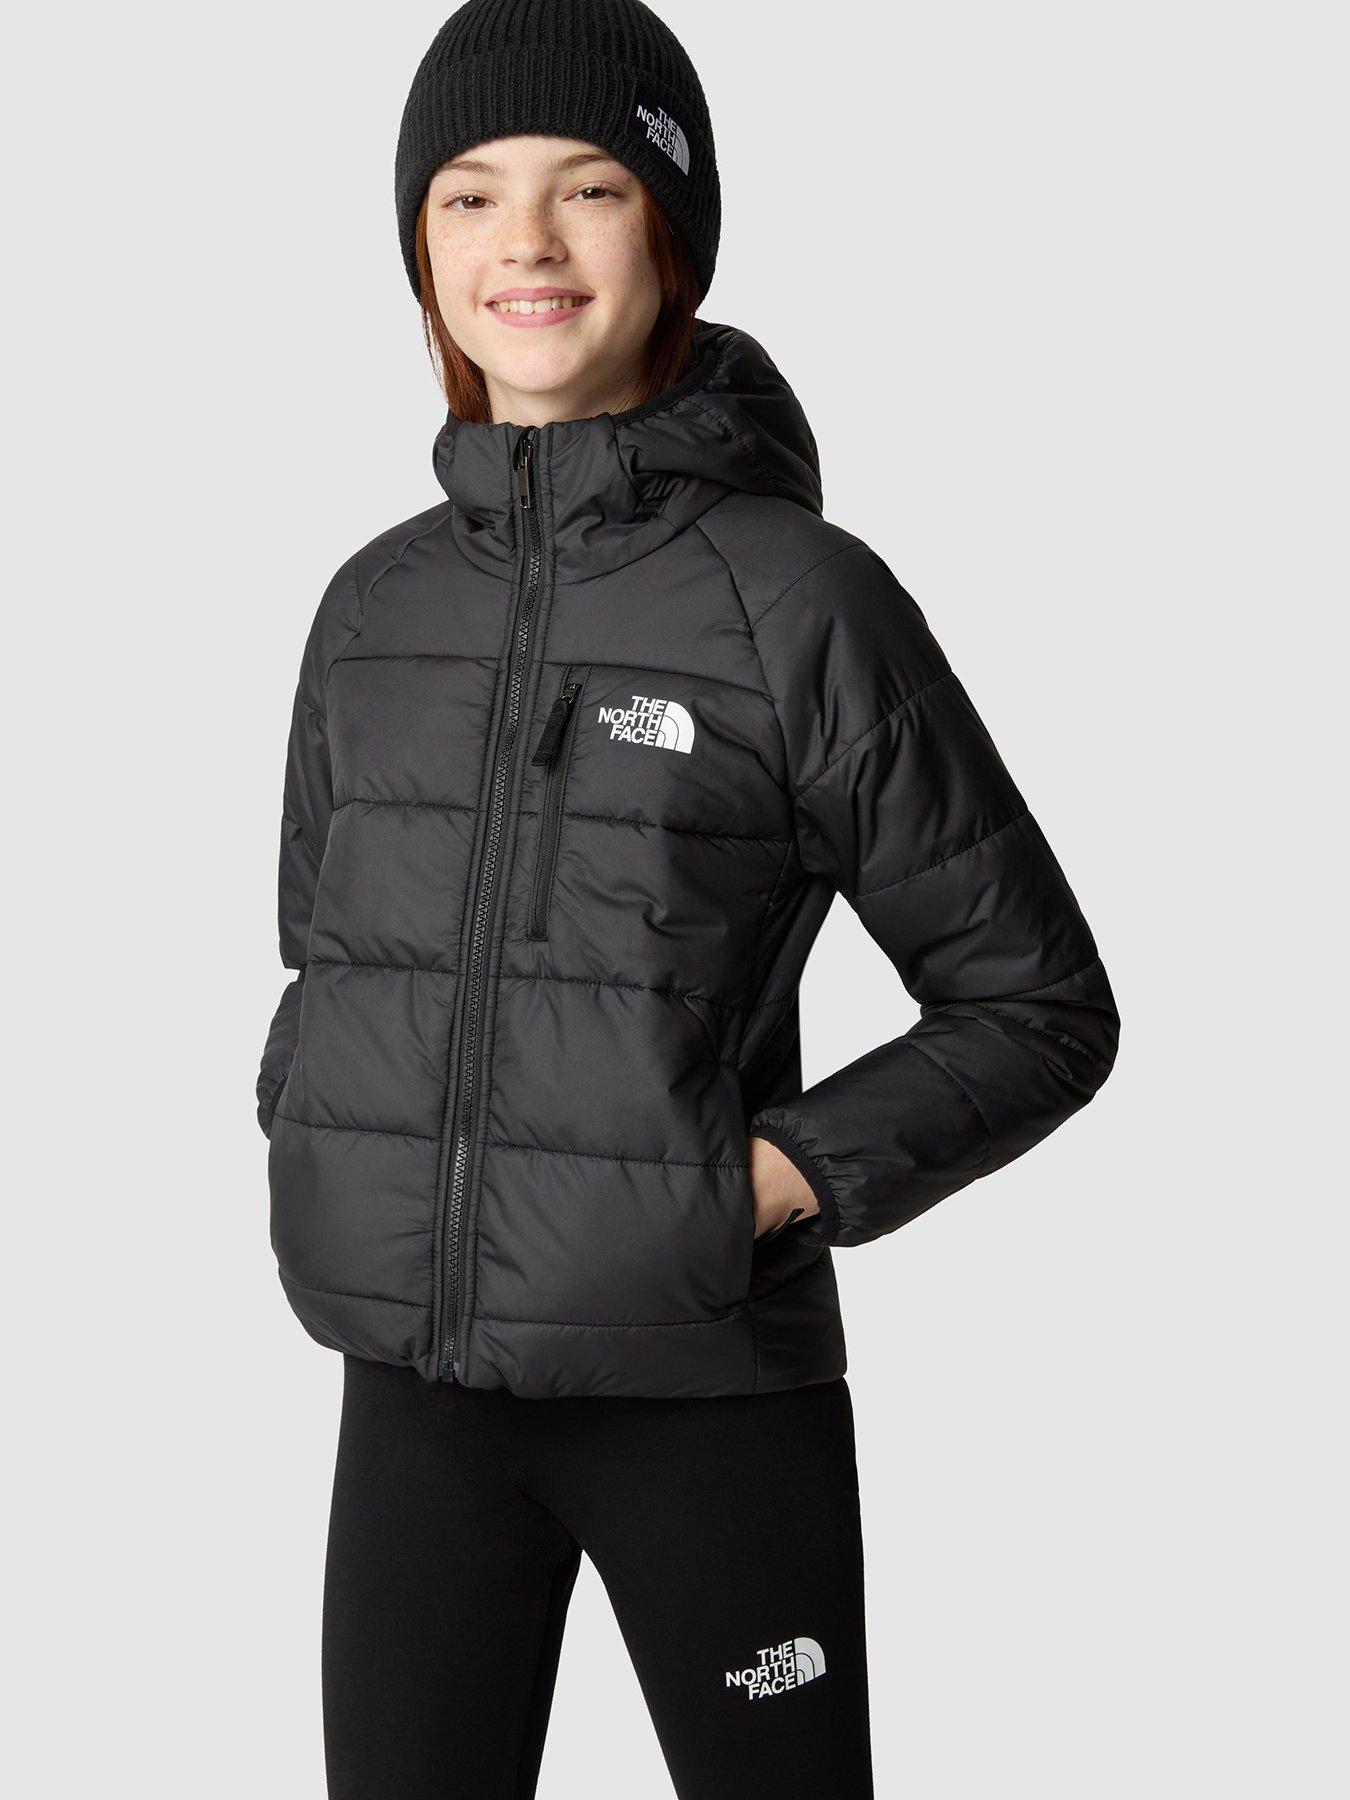 THE NORTH FACE Older Girls Reversible Perrito Jacket - Black | very.co.uk